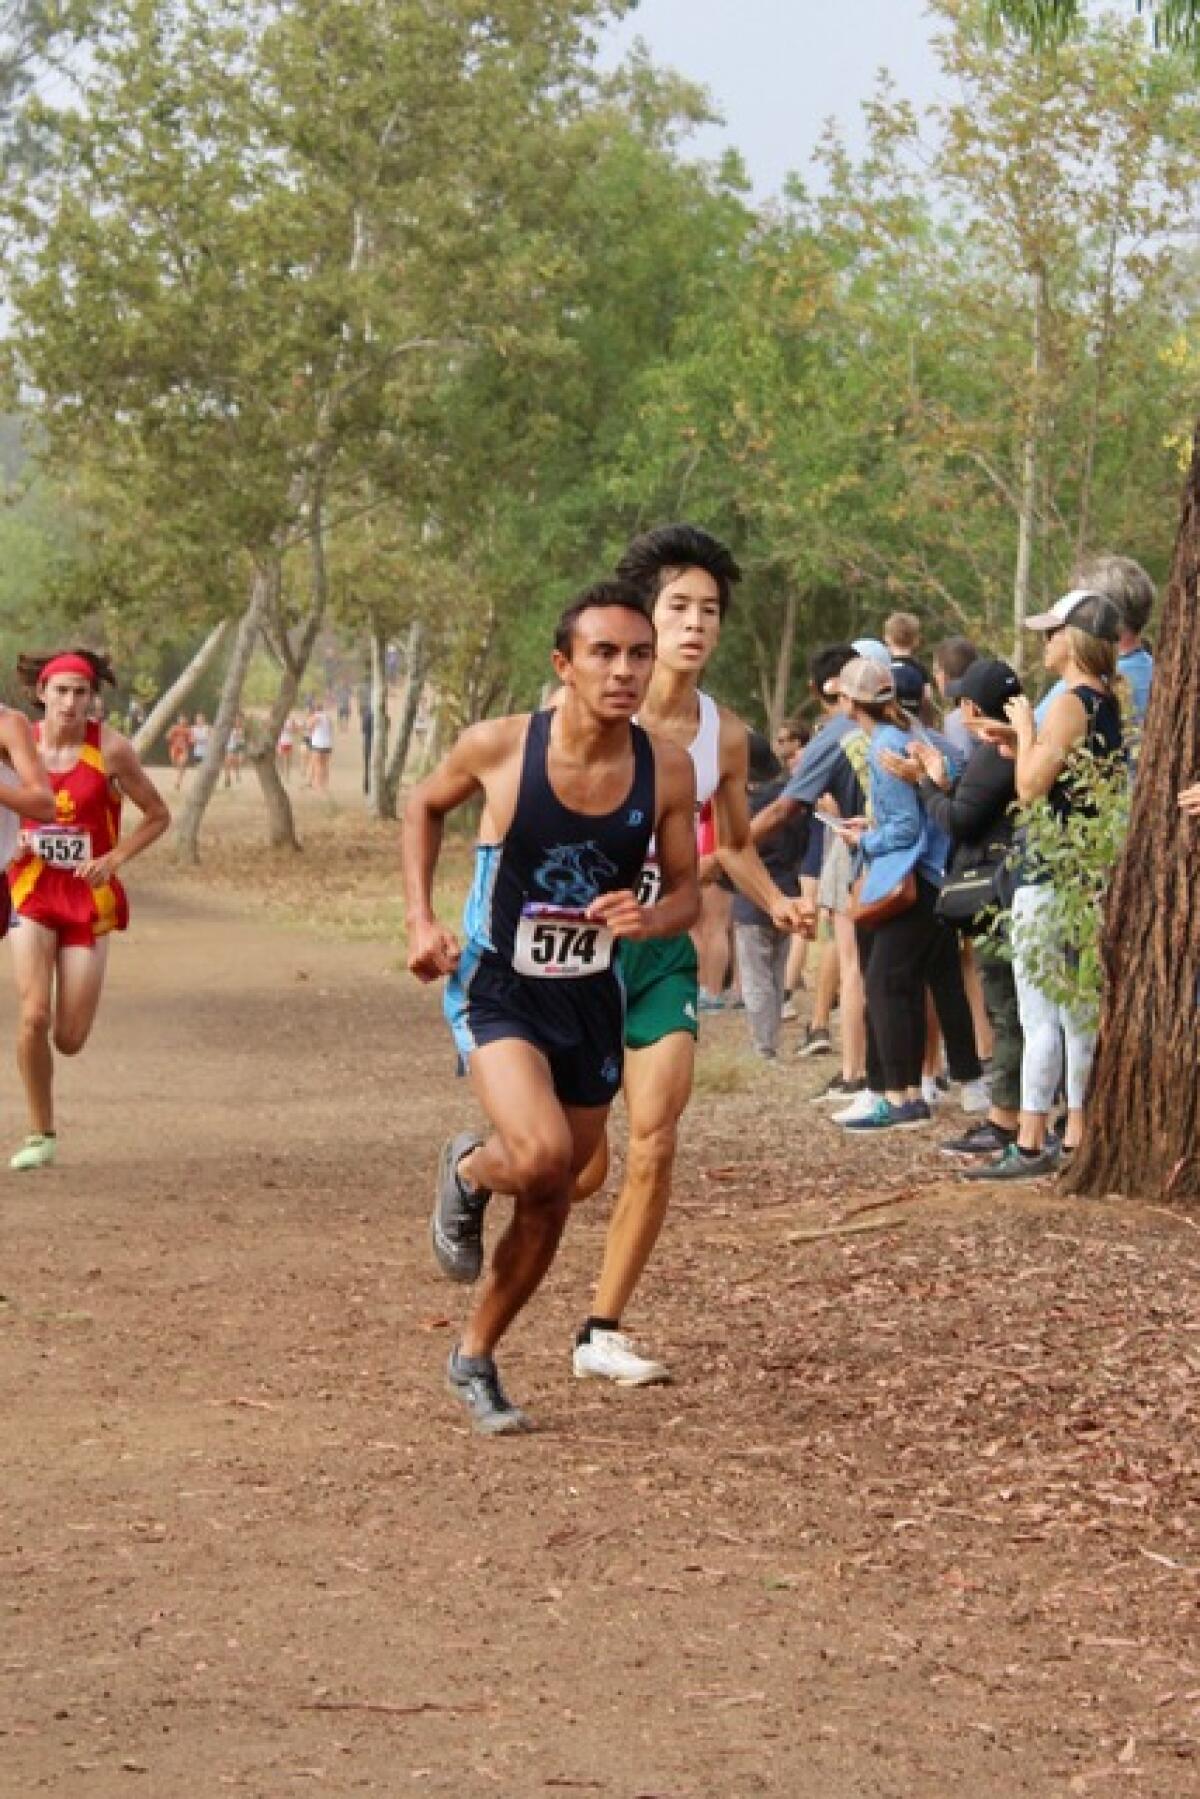 Ayden Wohlford, the No. 1 runner, for Otay Ranch High.